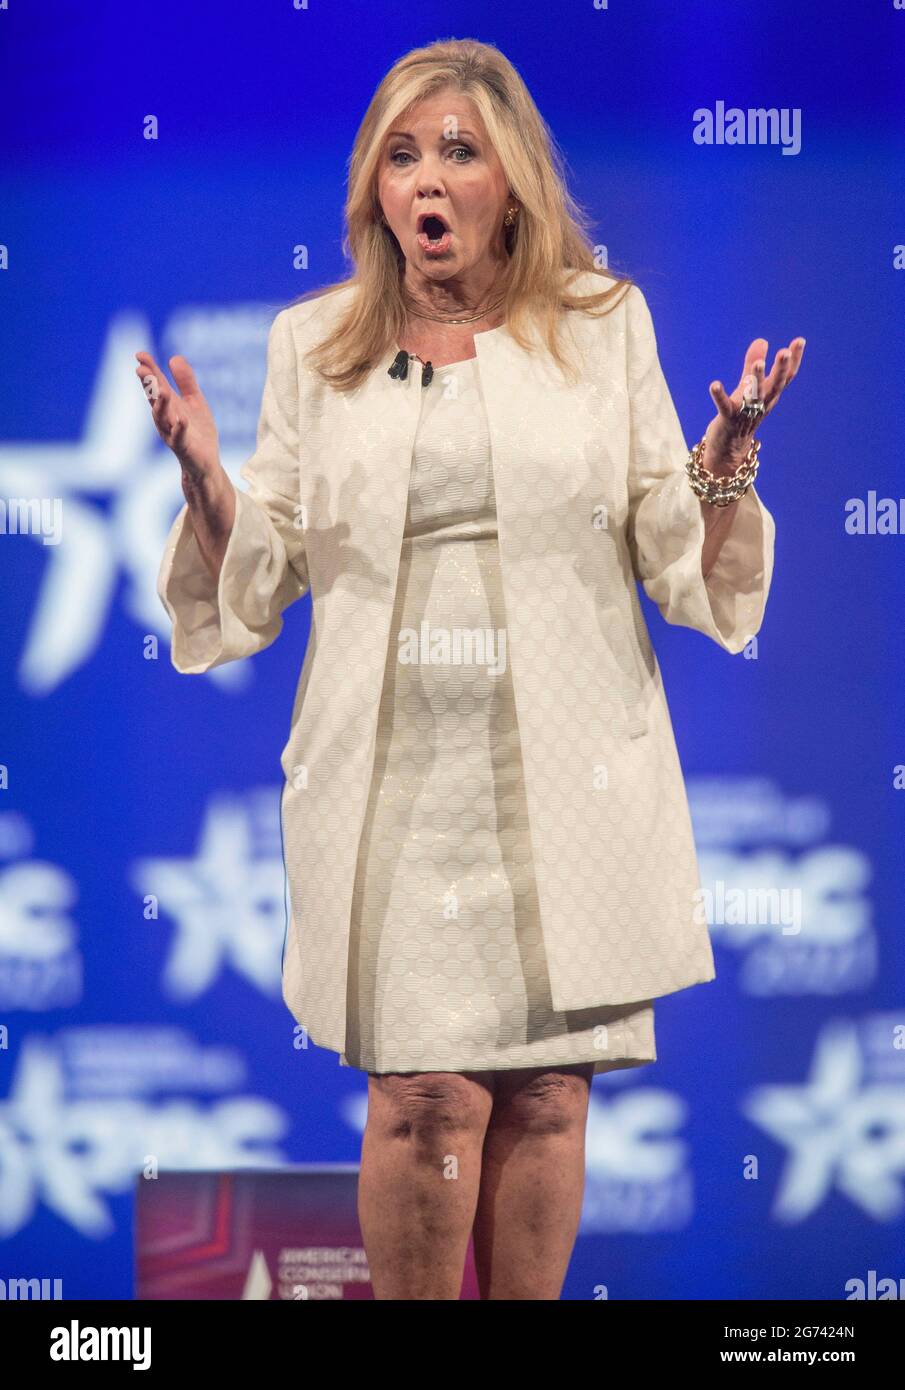 Dallas, Texas, USA. 10th July, 2021. U.S. Senator MARSHA BLACKBURN (R-TN) speaks at CPAC 2021: America UnCanceled. Organized by the American Conservative Union, the three-day conference features speakers from the right side of America's political spectrum. Credit: Brian Cahn/ZUMA Wire/Alamy Live News Stock Photo